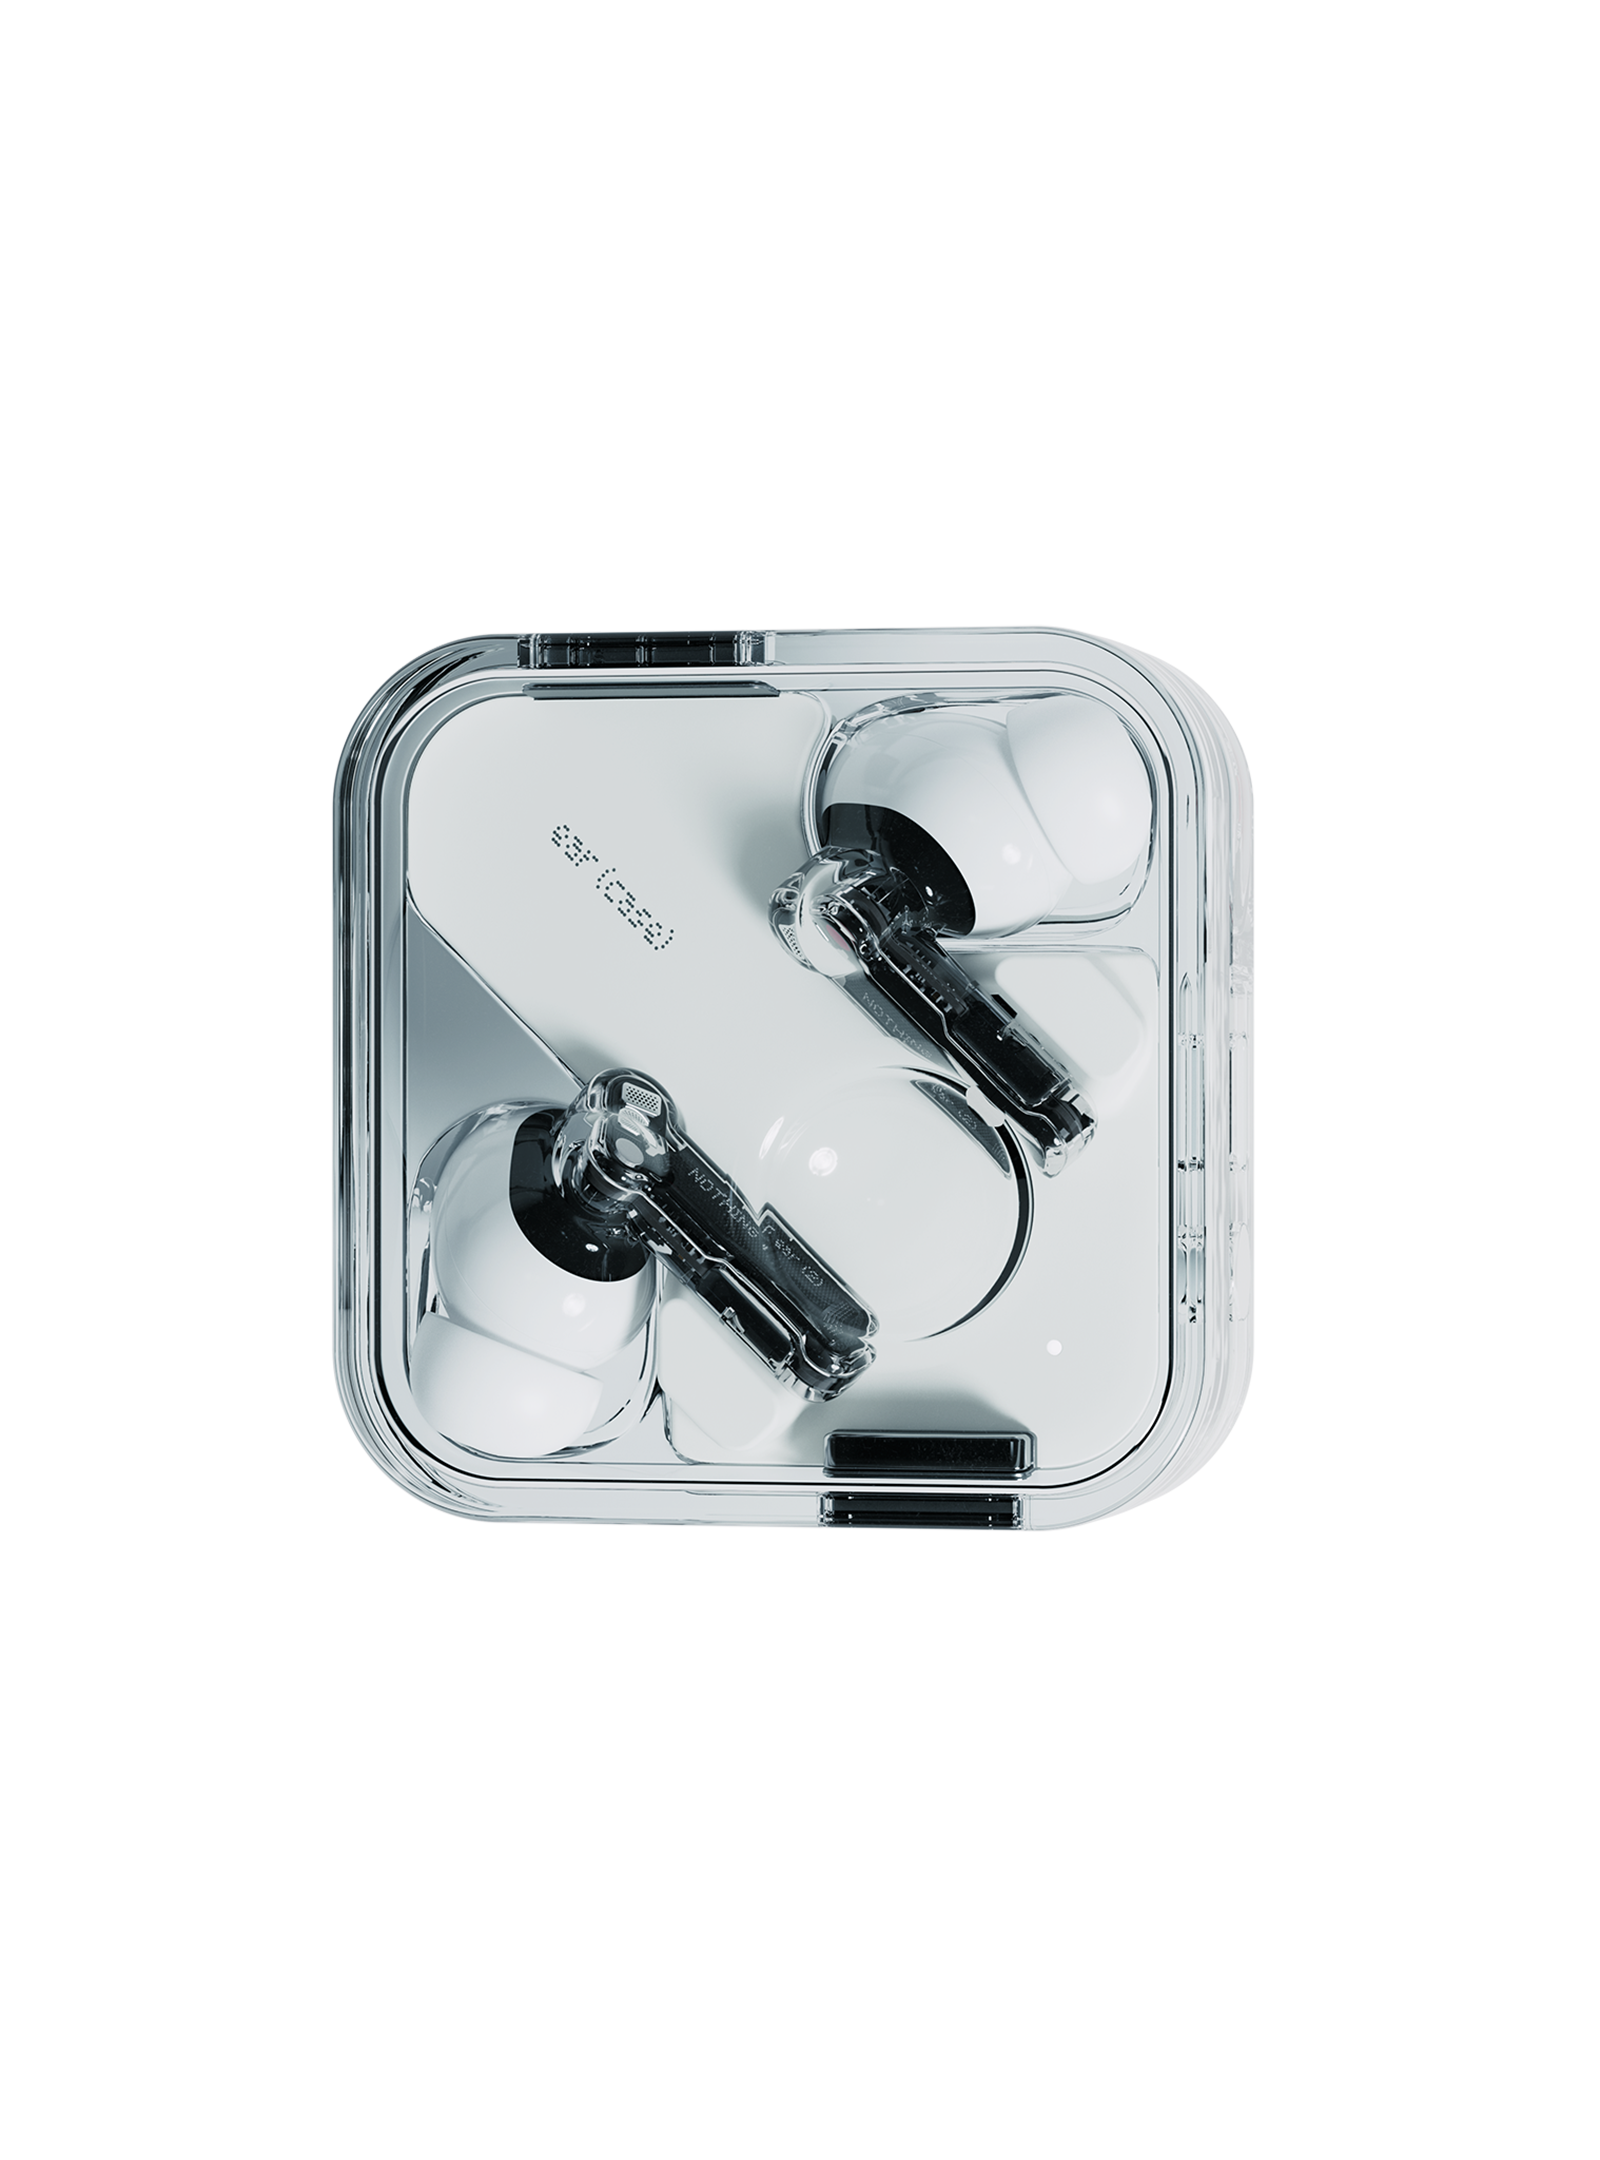 Nothing Ear 2 Hi-Res Wireless Earbuds, 2023 New Noise Cancelling Headphones  with Dual Chamber Design, Bluetooth Earbuds for iPhone, Android, 4.5g Ultra  Light, 36Hrs Playtime, Black